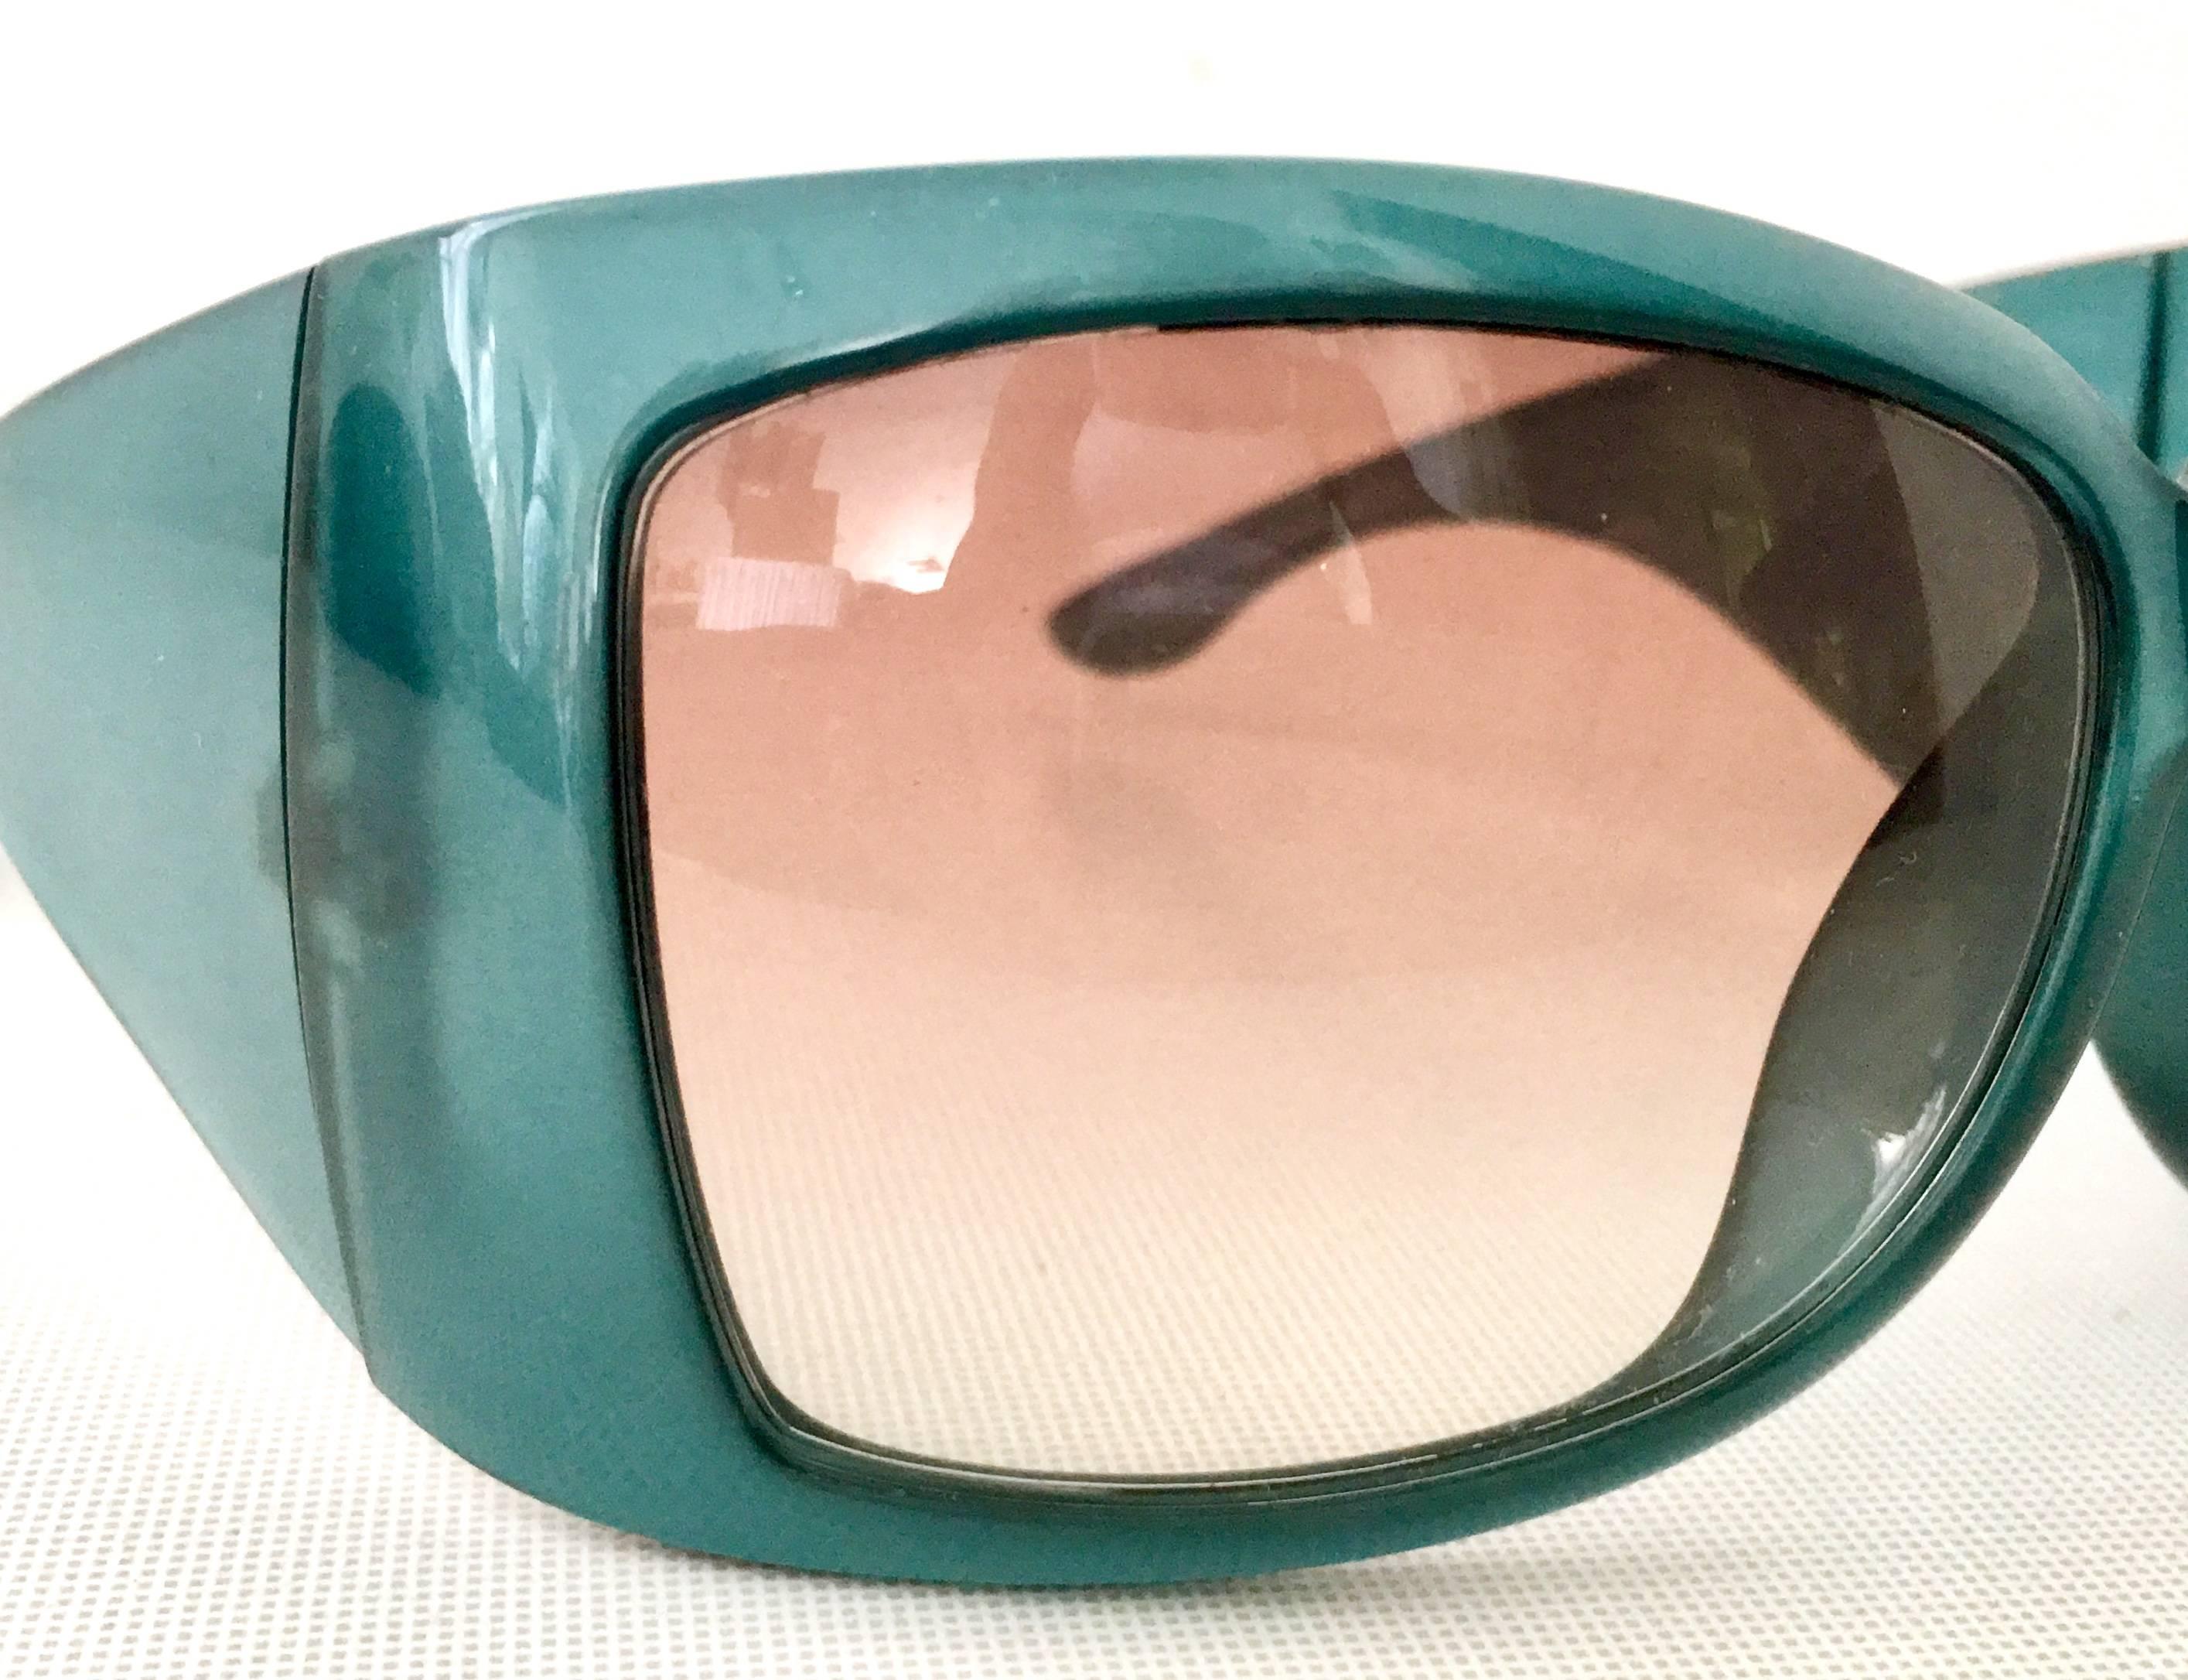 Beige 2007 Gucci Teal Oversized Logo Sunglasses-Italy